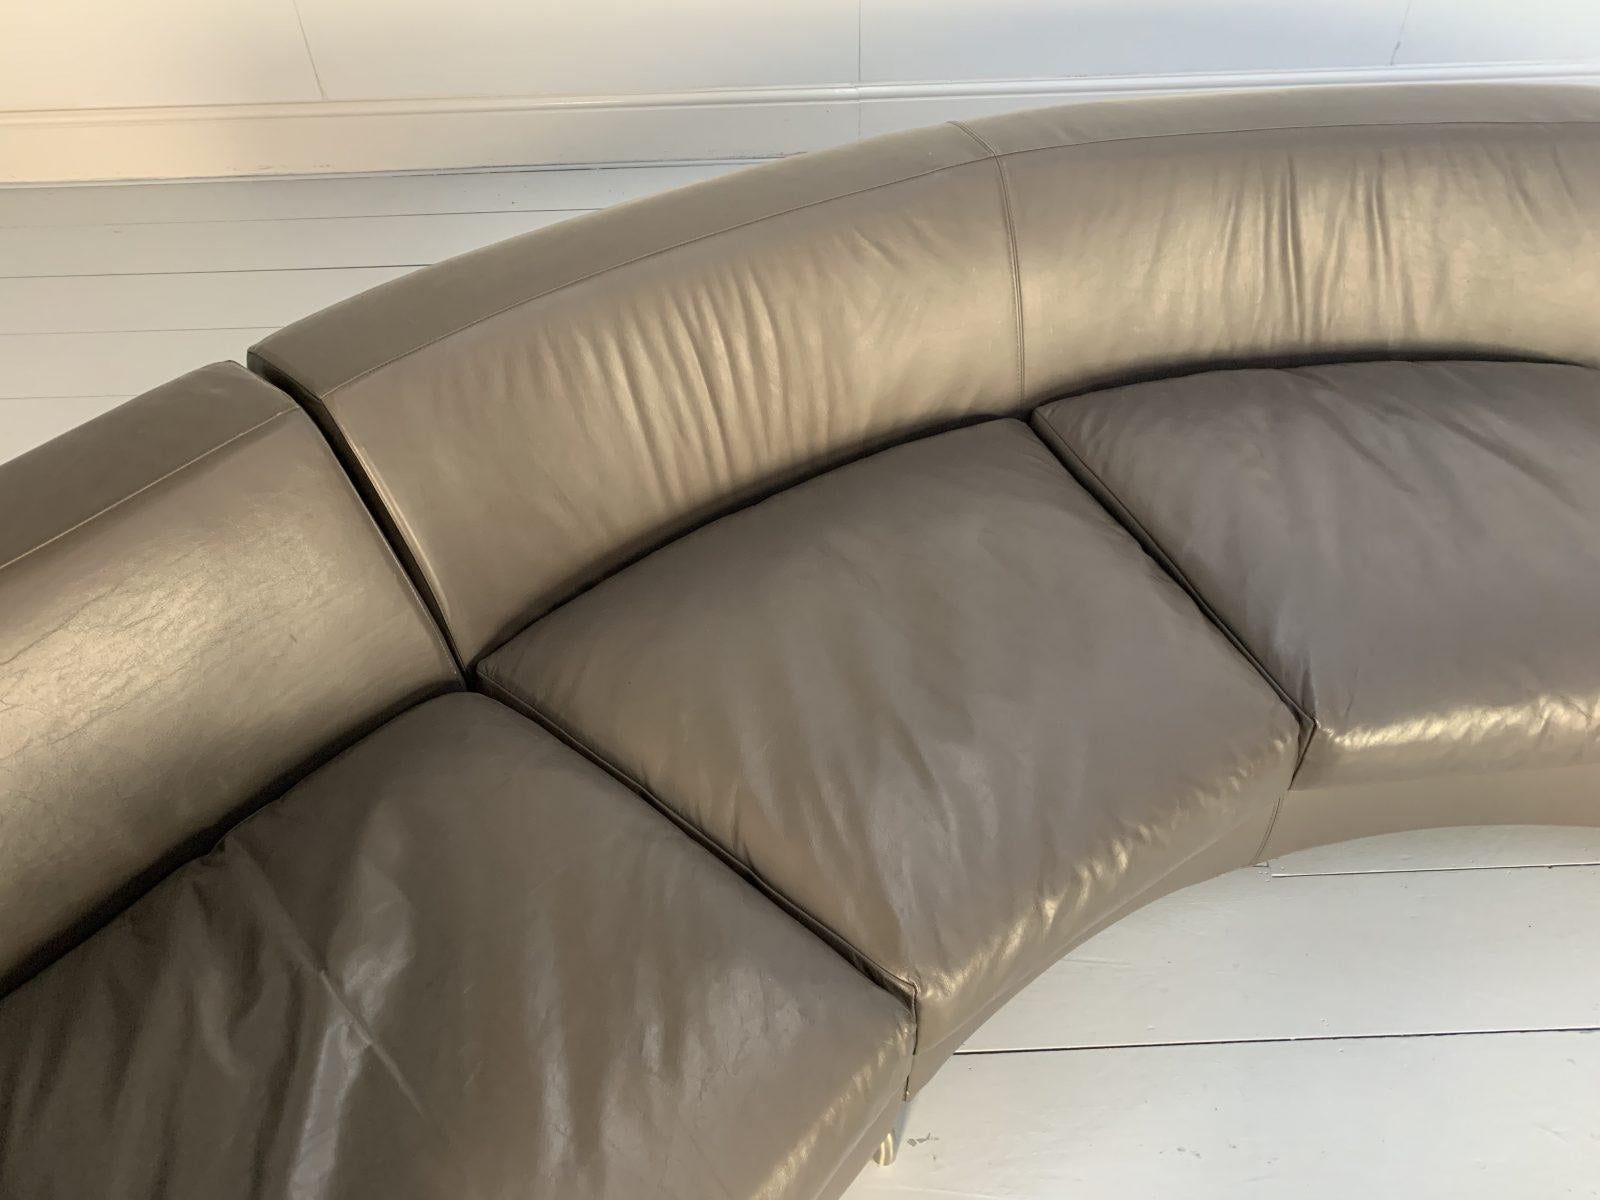 Contemporary Rare Minotti “Dubuffet” Curved Sofa – in Dark Grey “Pelle” Leather For Sale